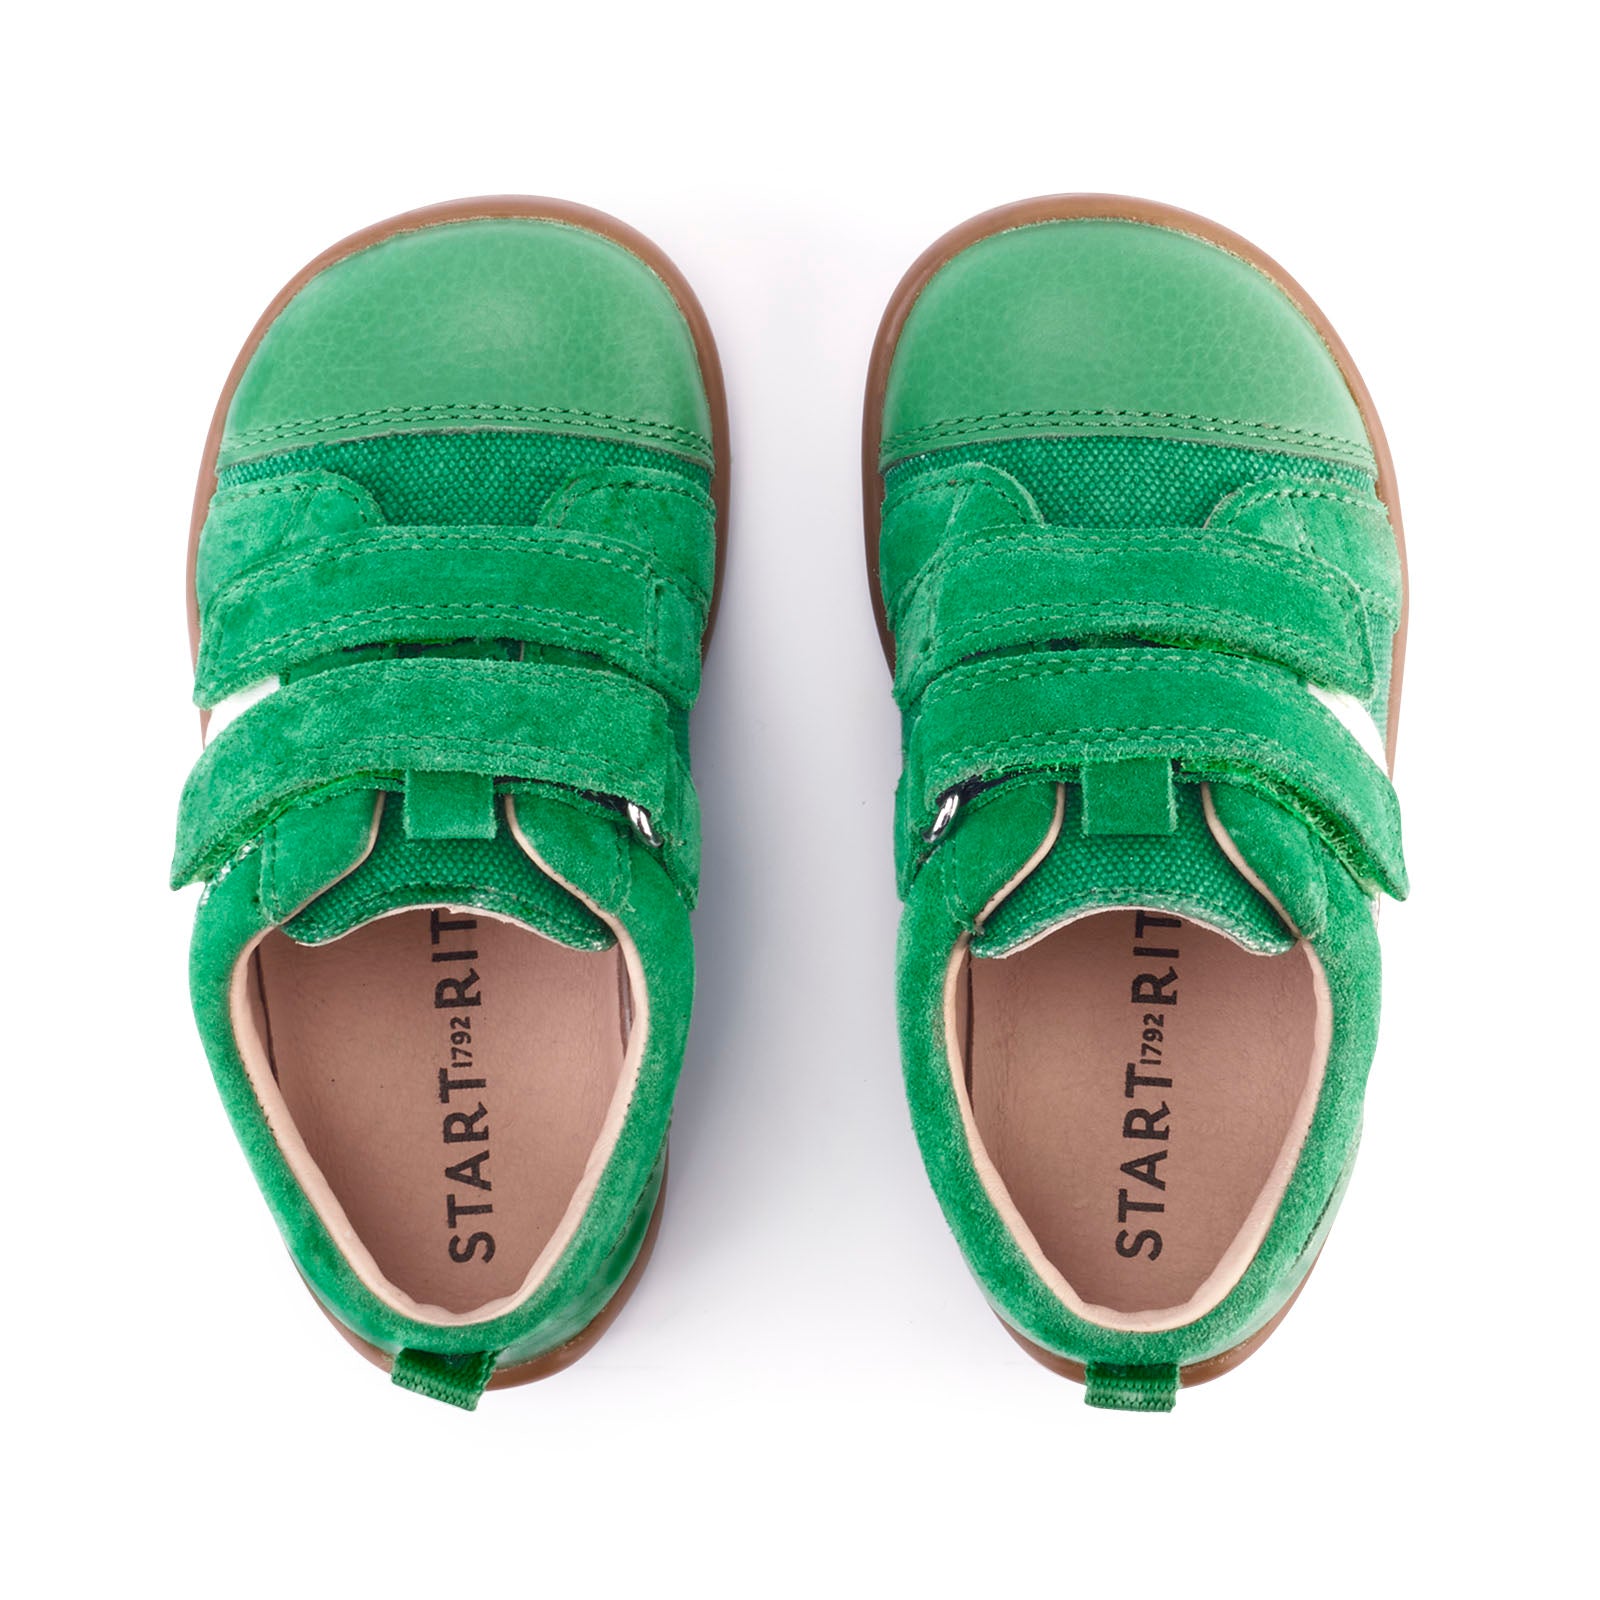 A pair of boys casual shoes by Start Rite, style Maze, in green and white with double velcro fastening. Above view.